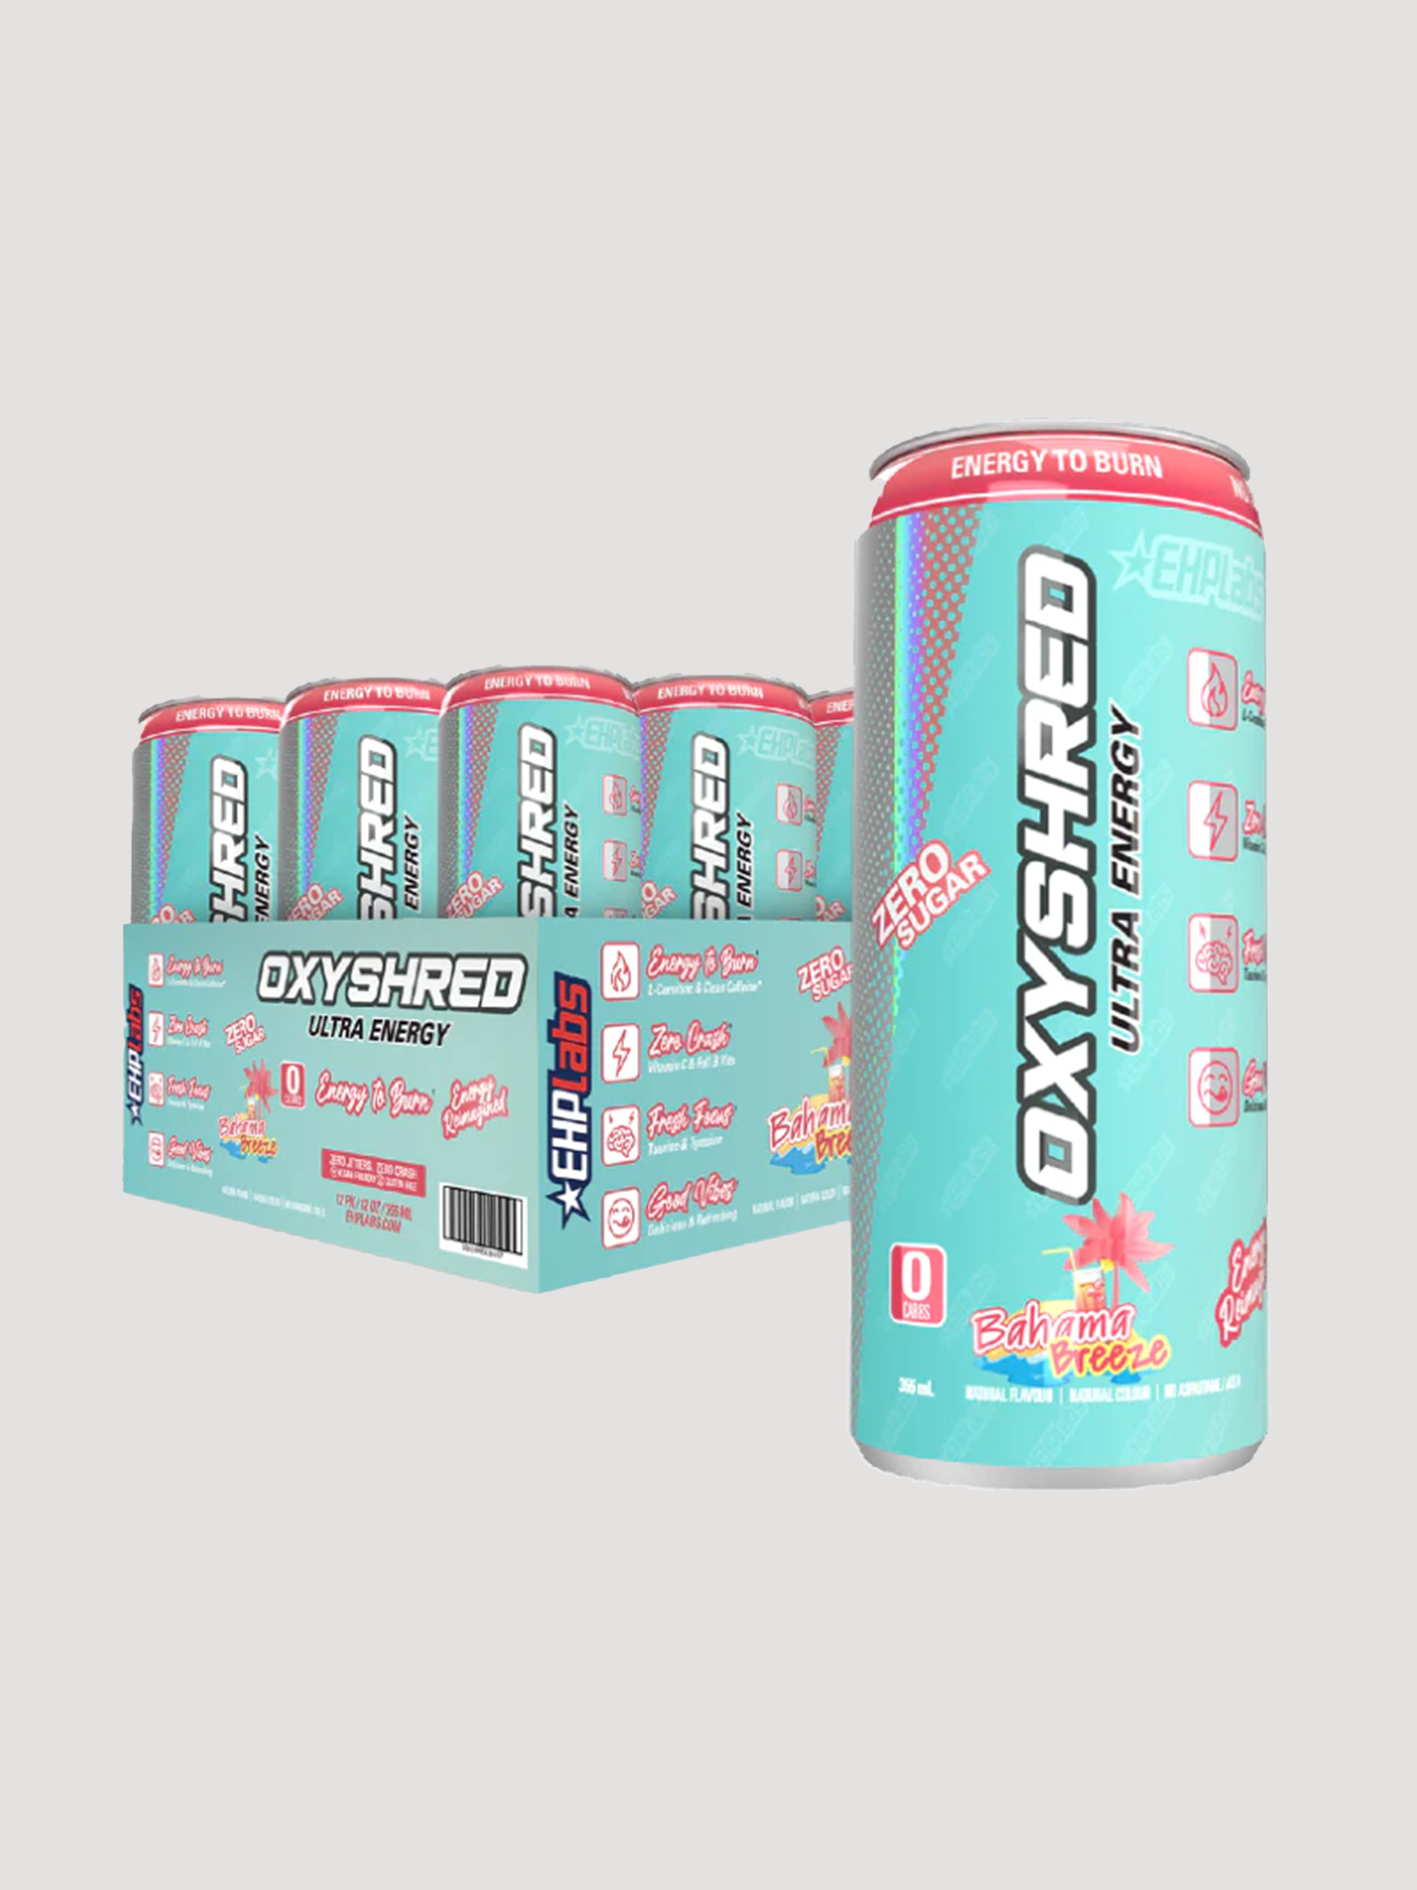 OxyShred Energy Drink, EHP Labs, 12 Pack RTD